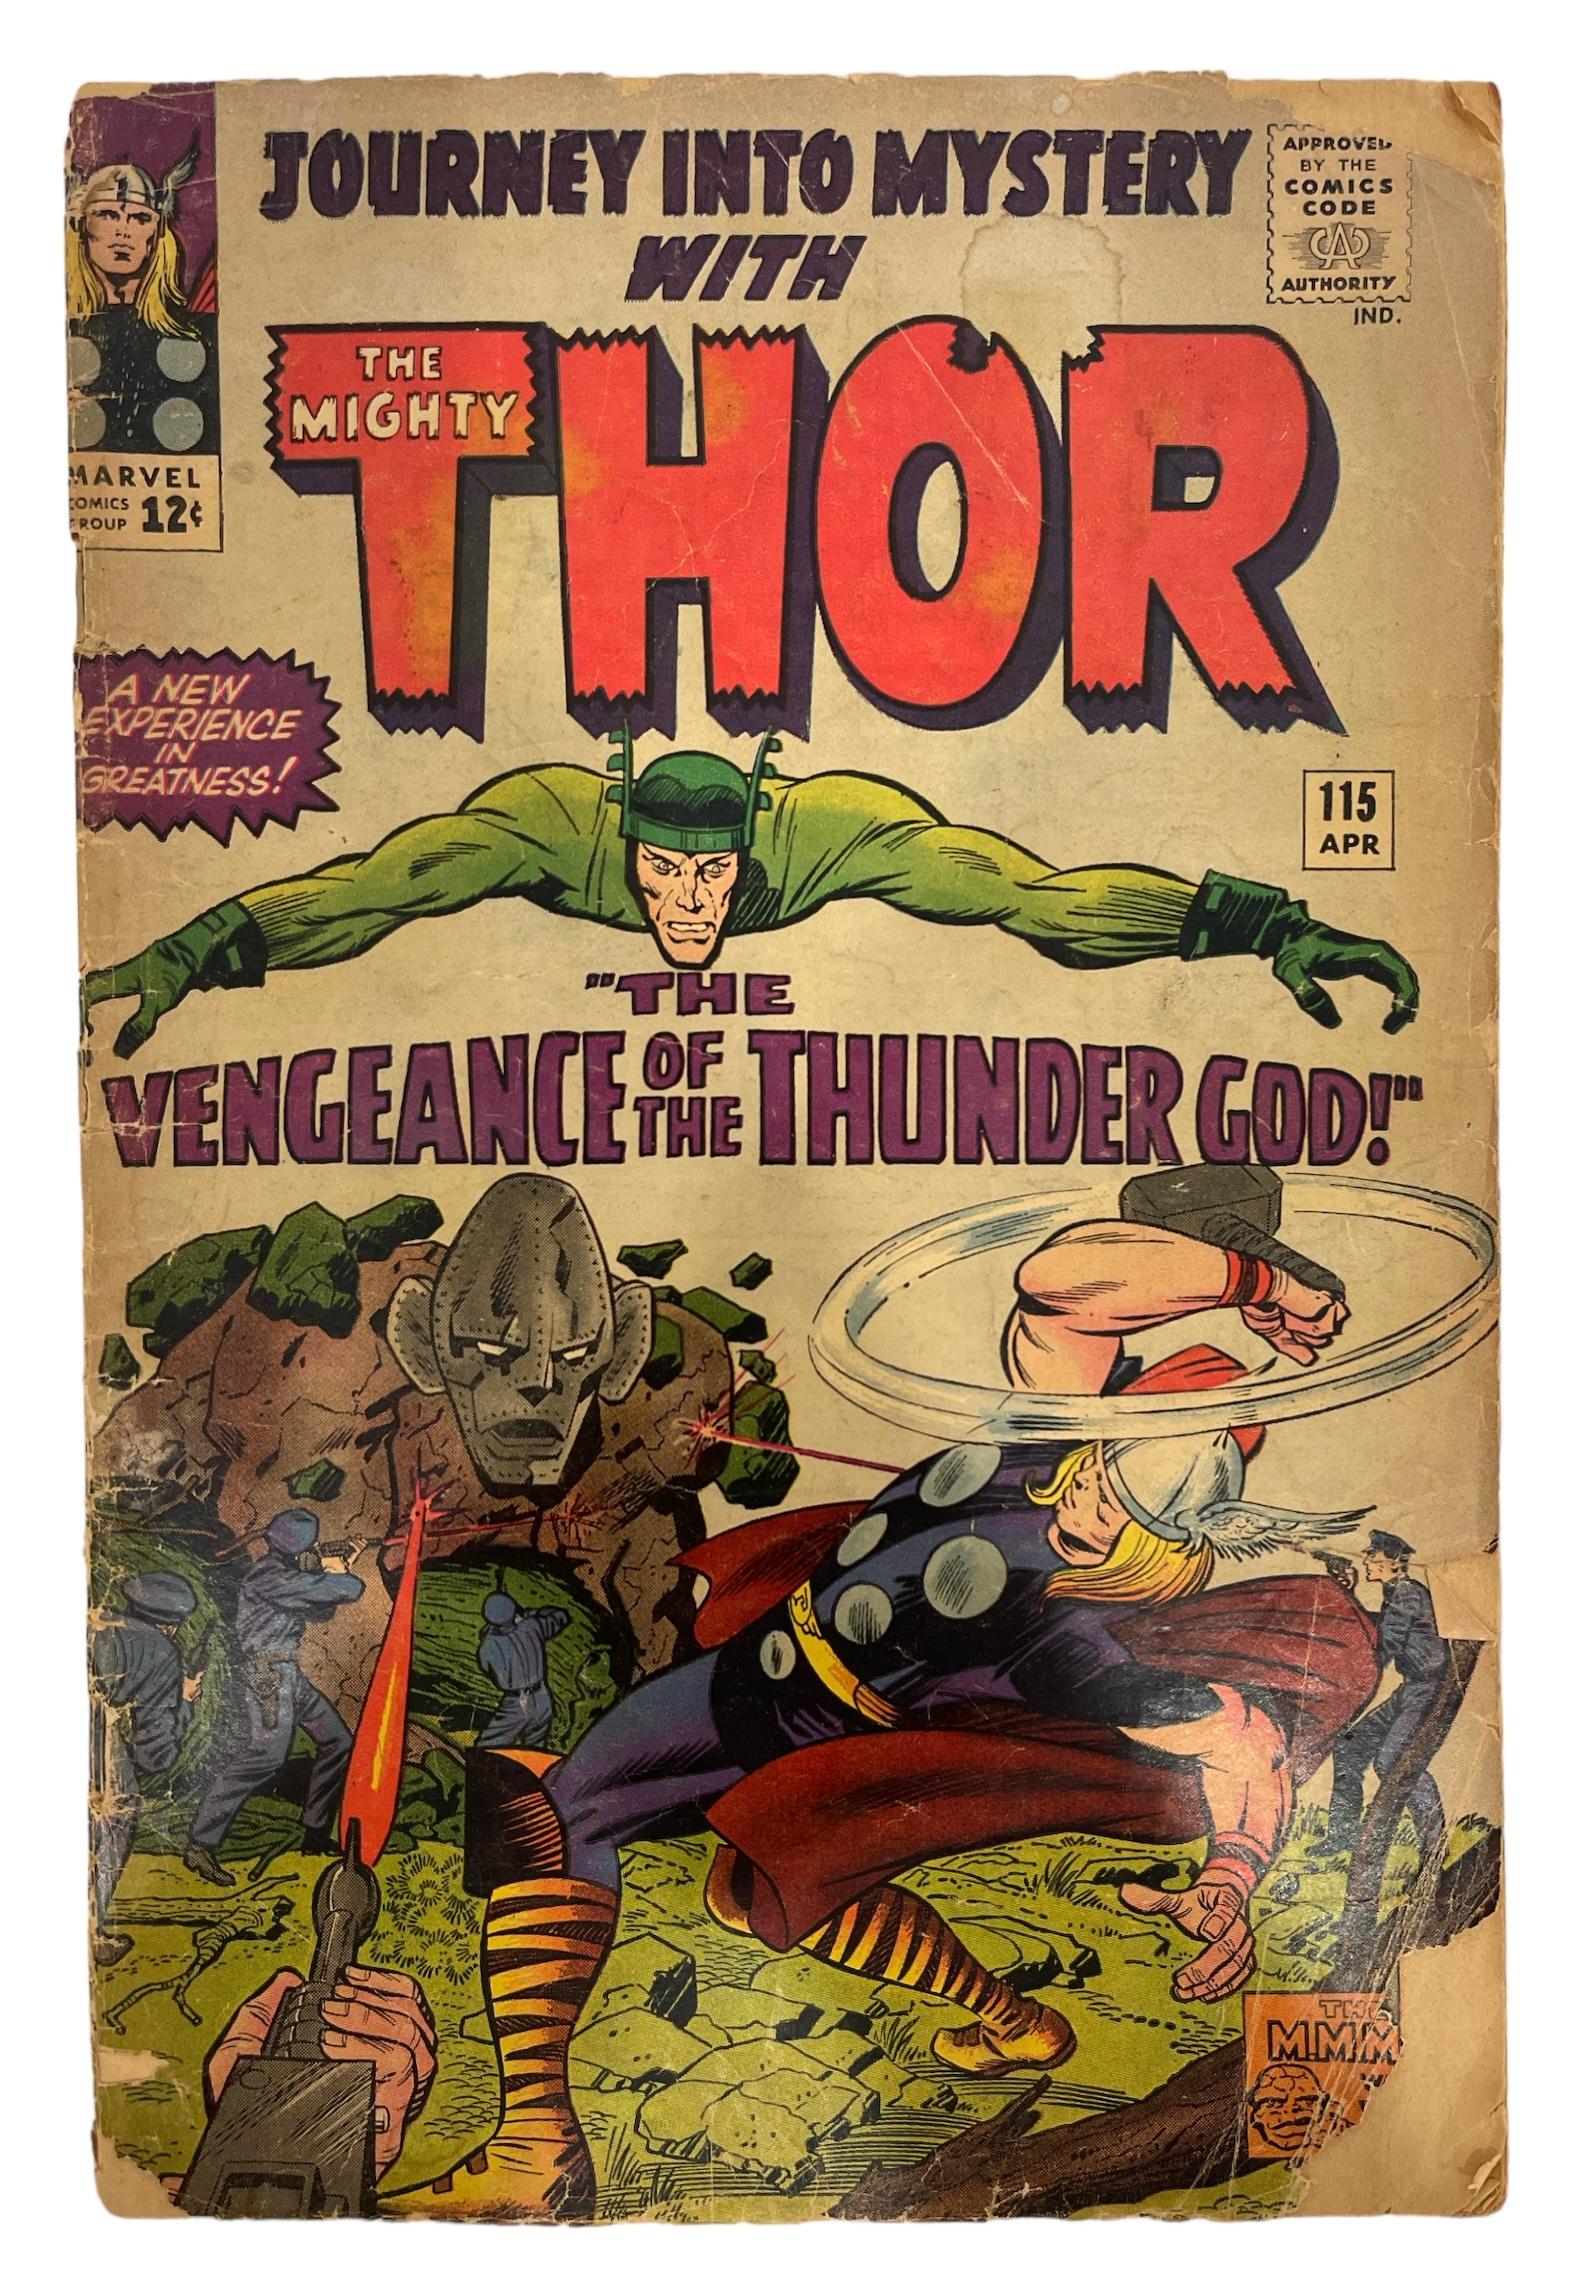 Vintage Marvel Comics - The Mighty Thor No.159 and No.115